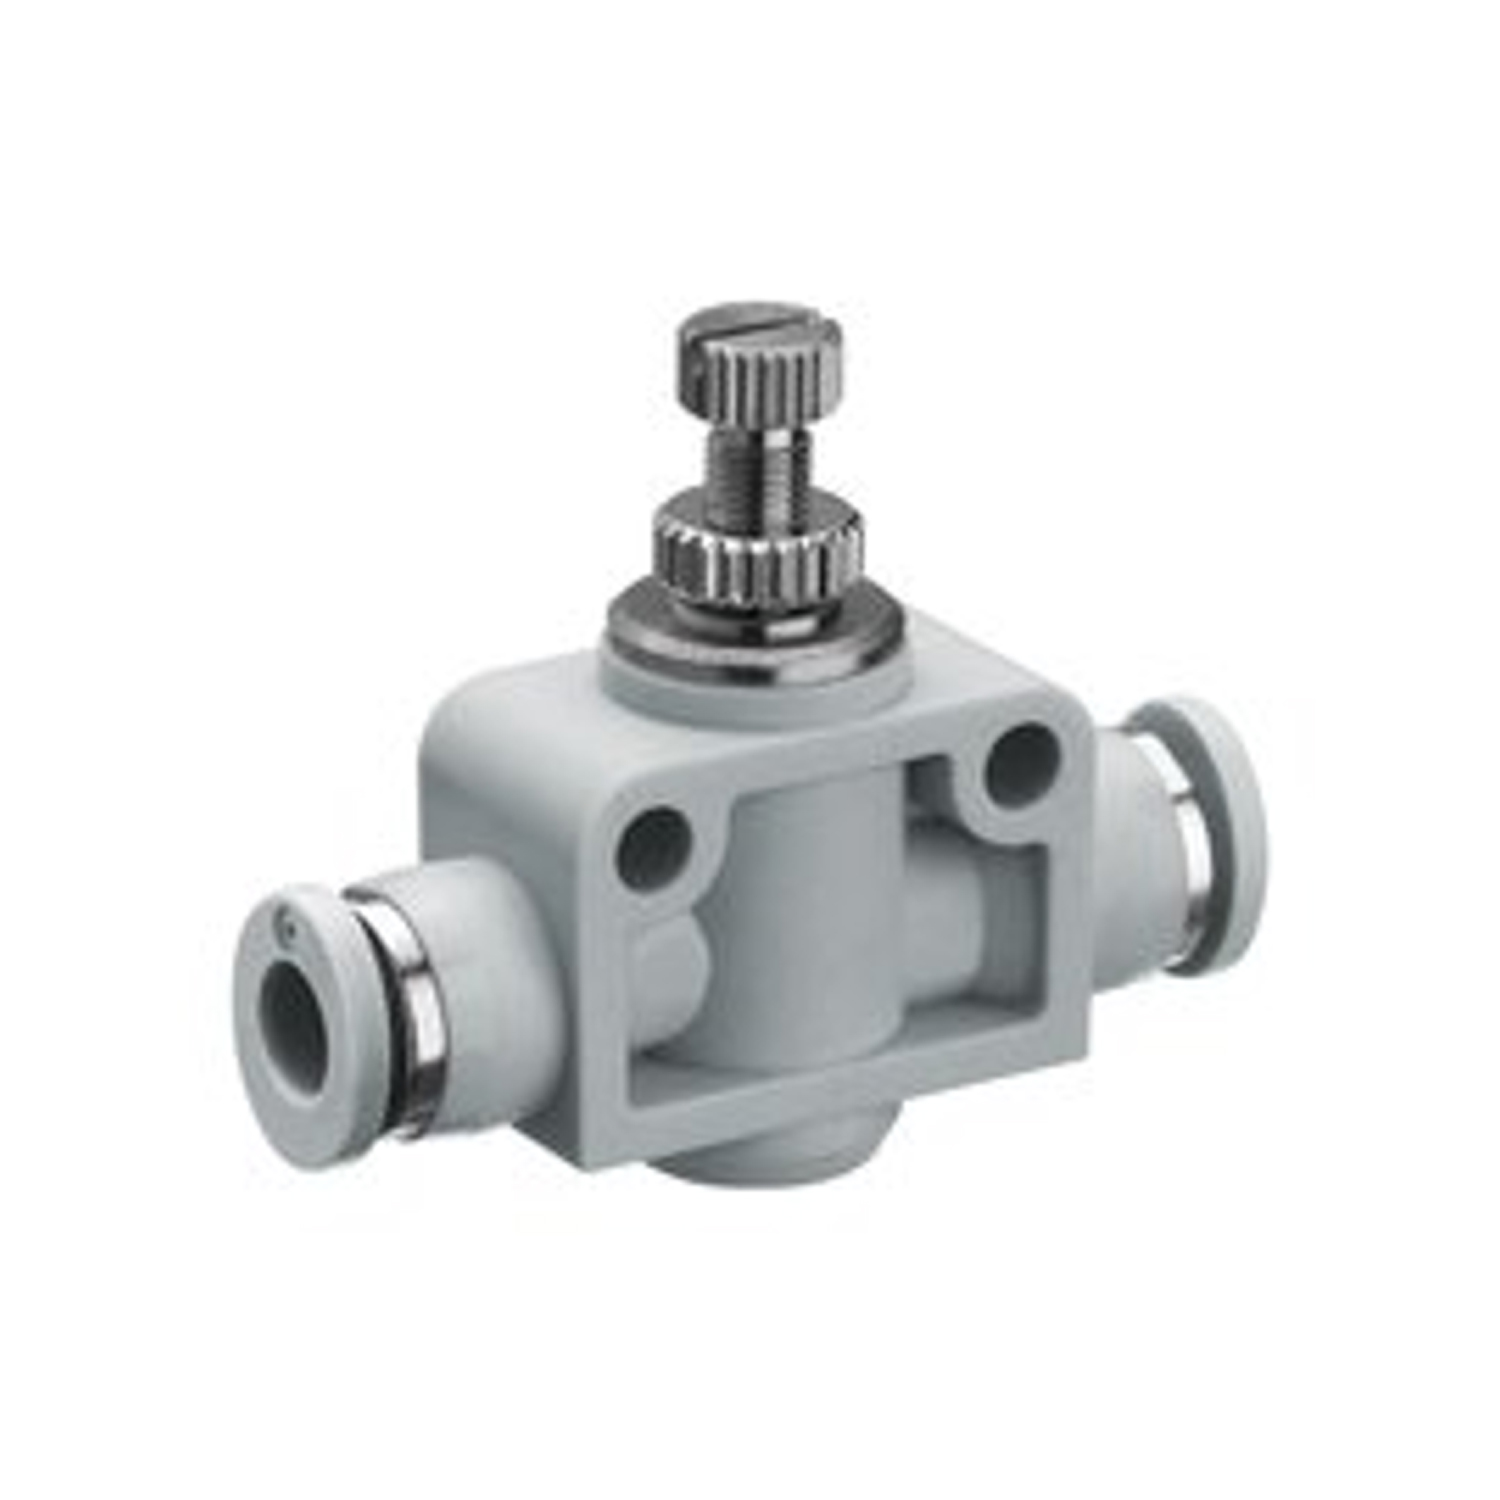 Plastic straight check valve with female push in on both sides and adjustable knob on top